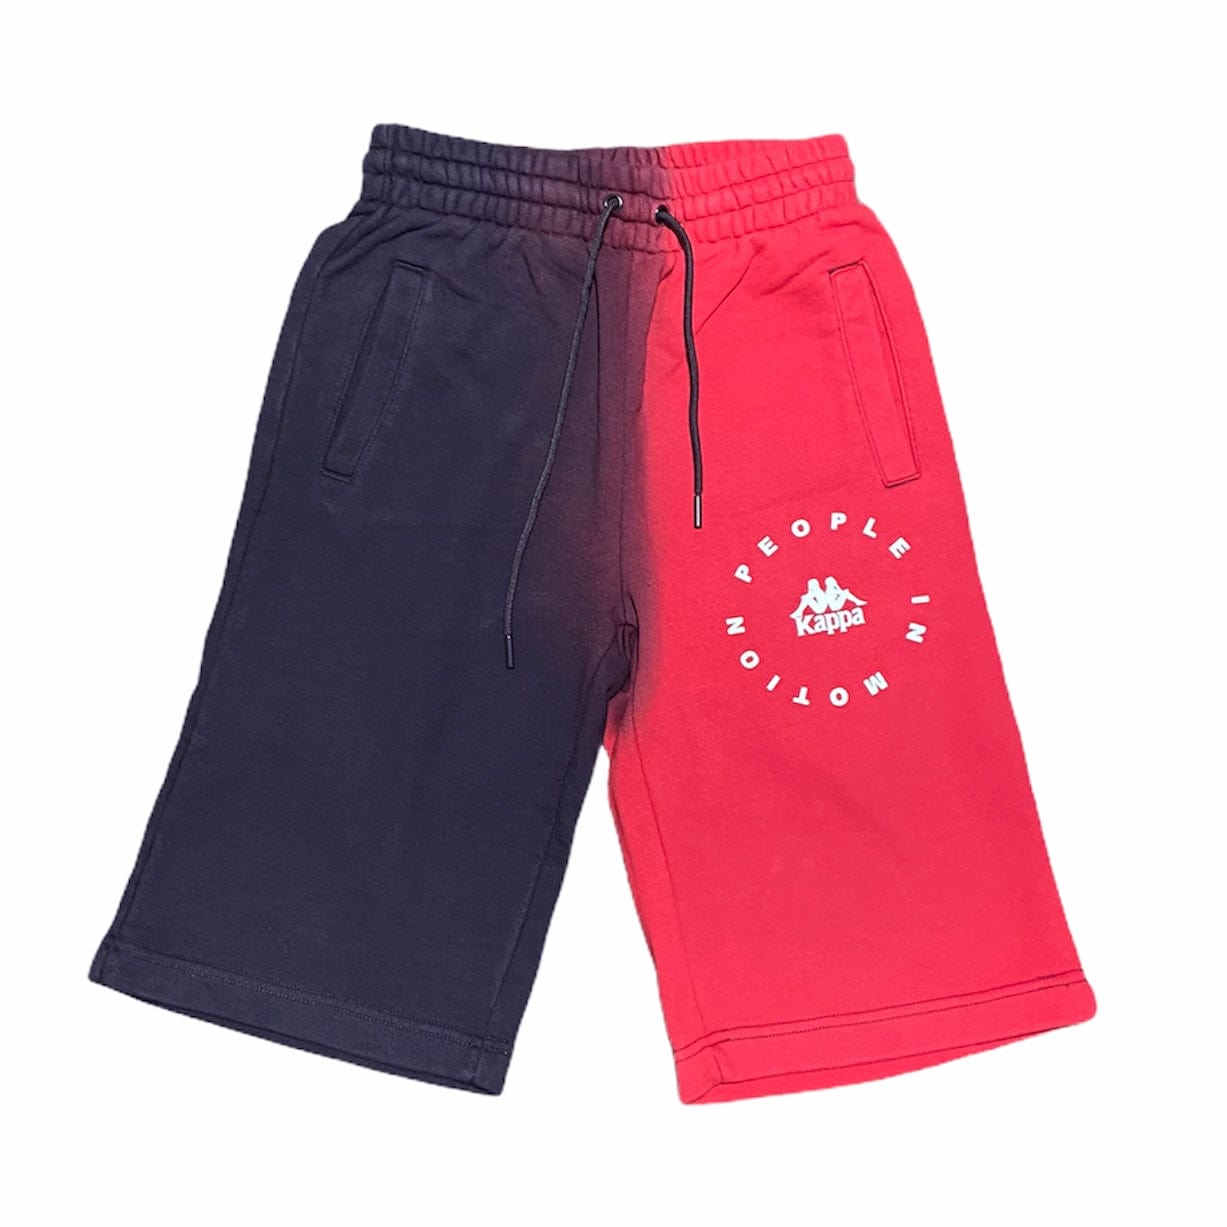 Authentic Shorts - Berrie City Man 36161CW USA – (Red/Blue/White) Kappa